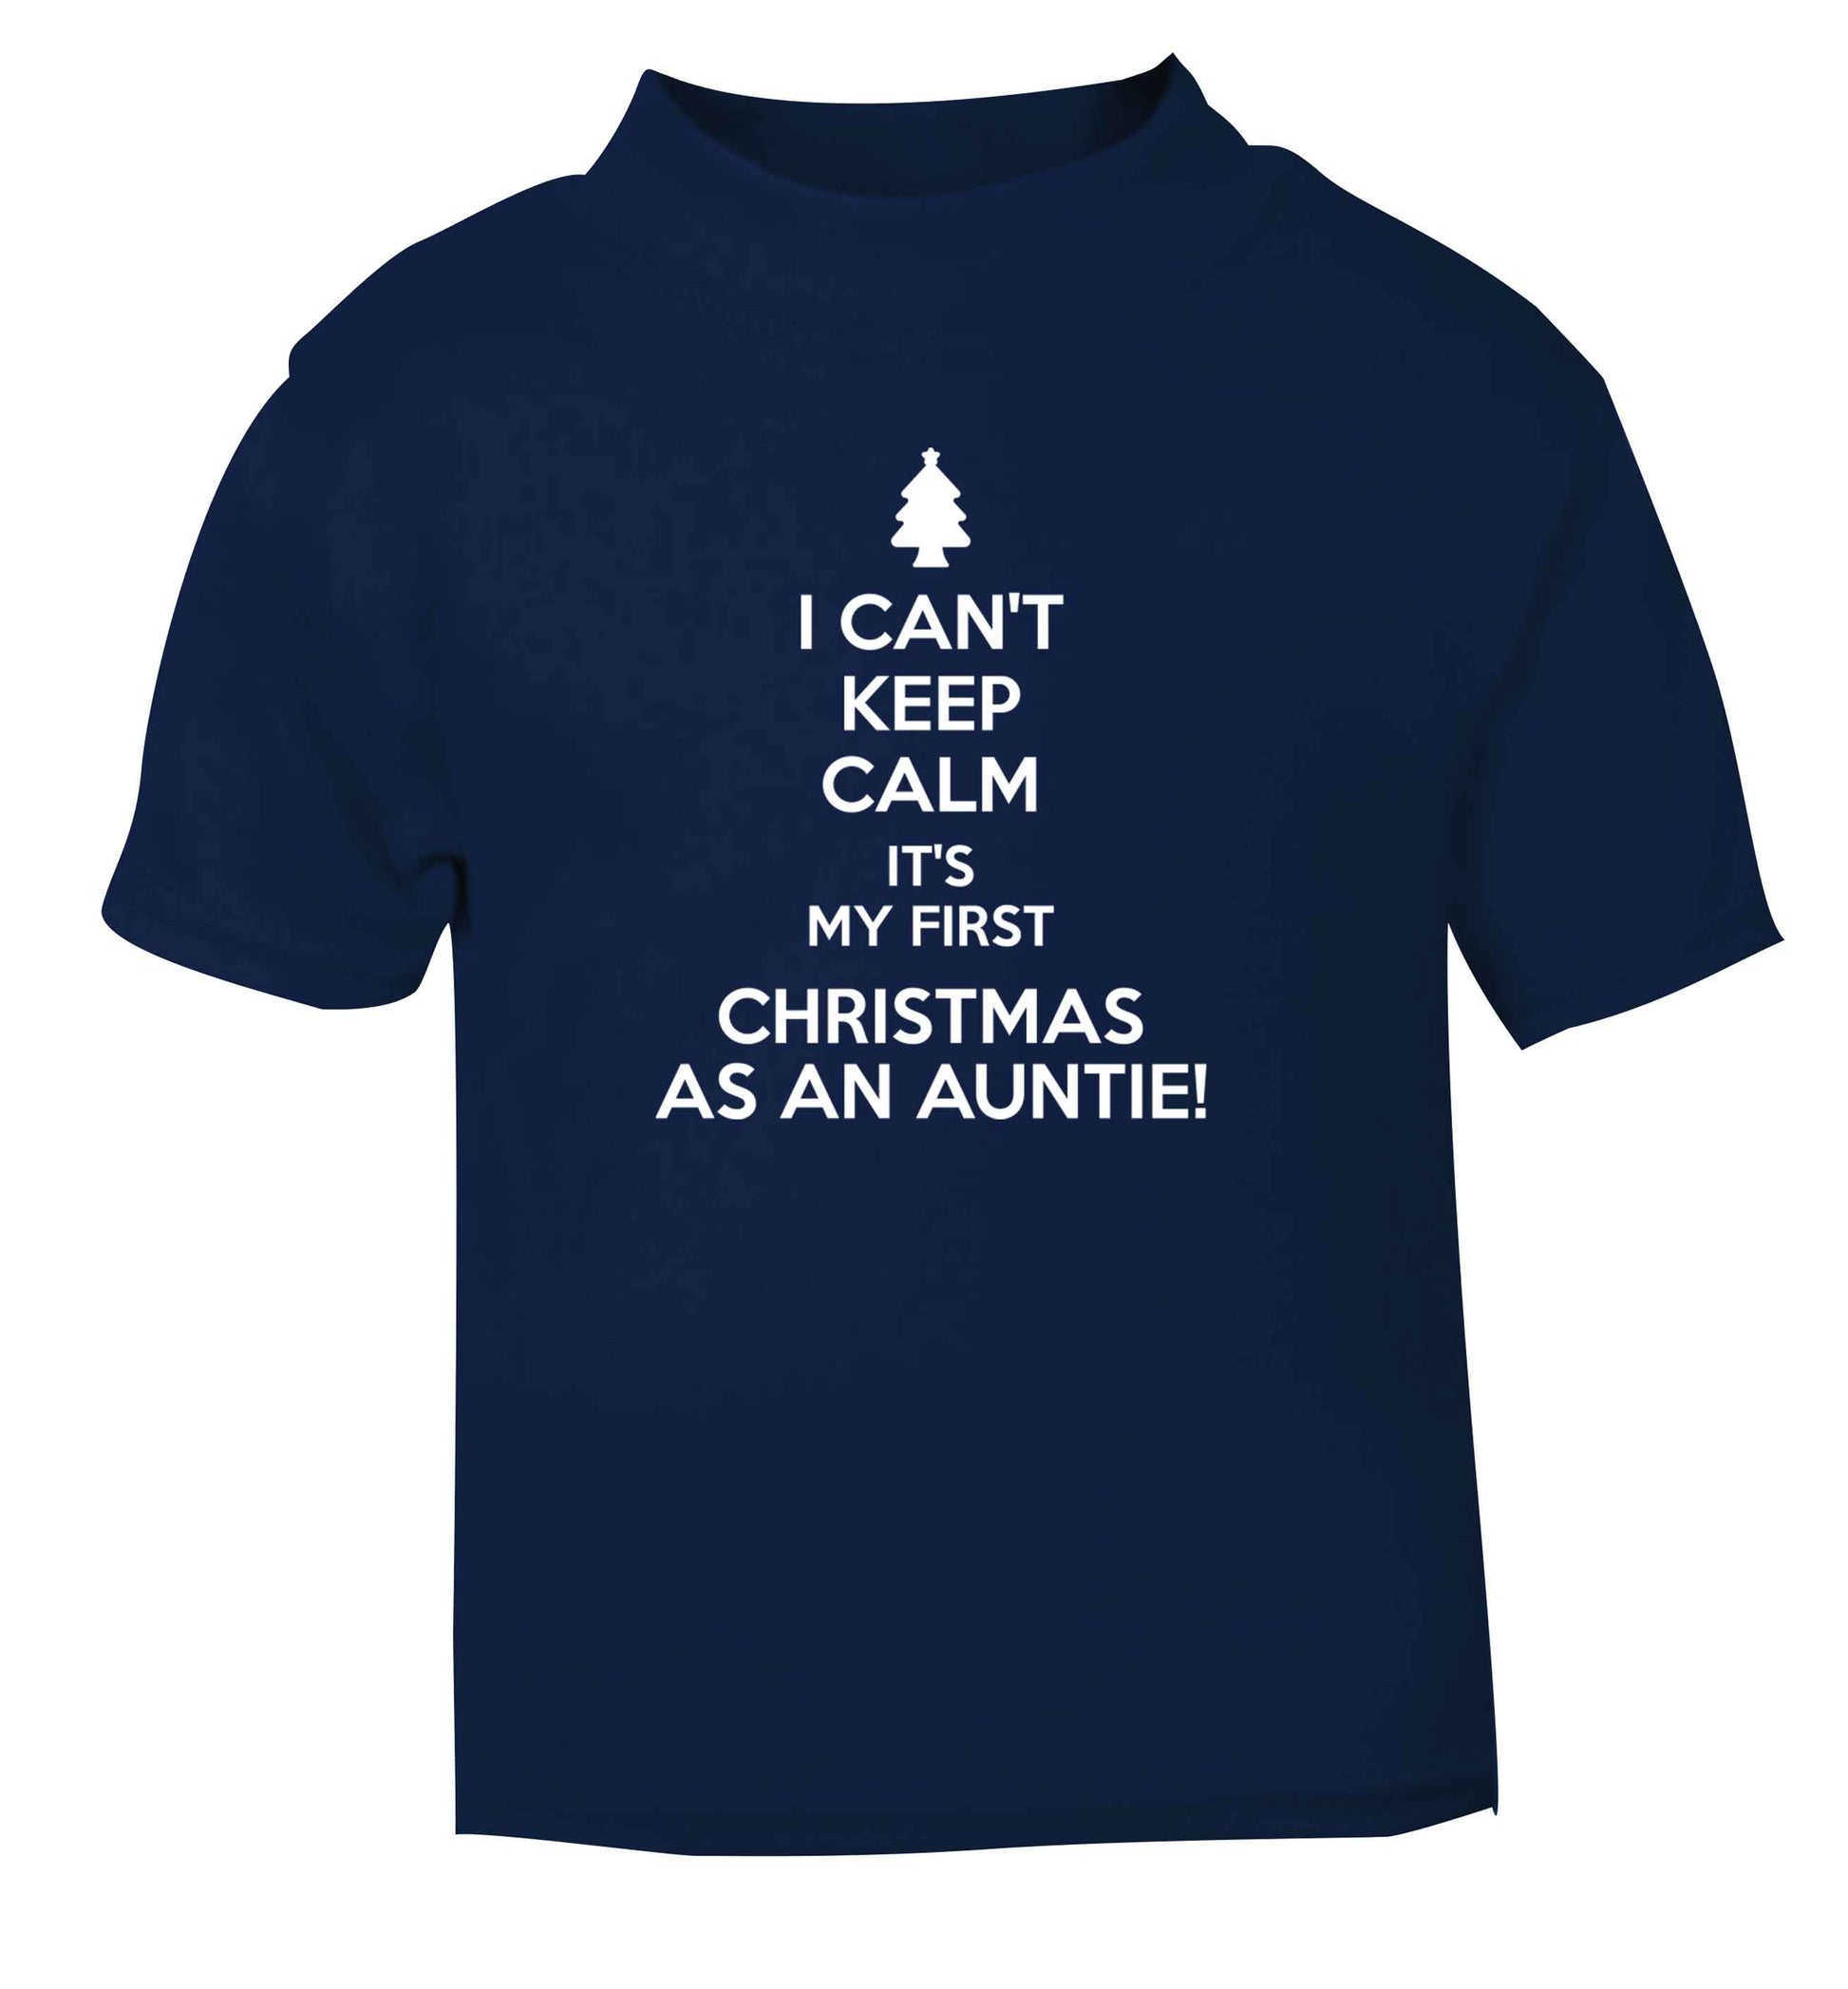 I can't keep calm it's my first Christmas as an auntie! navy Baby Toddler Tshirt 2 Years